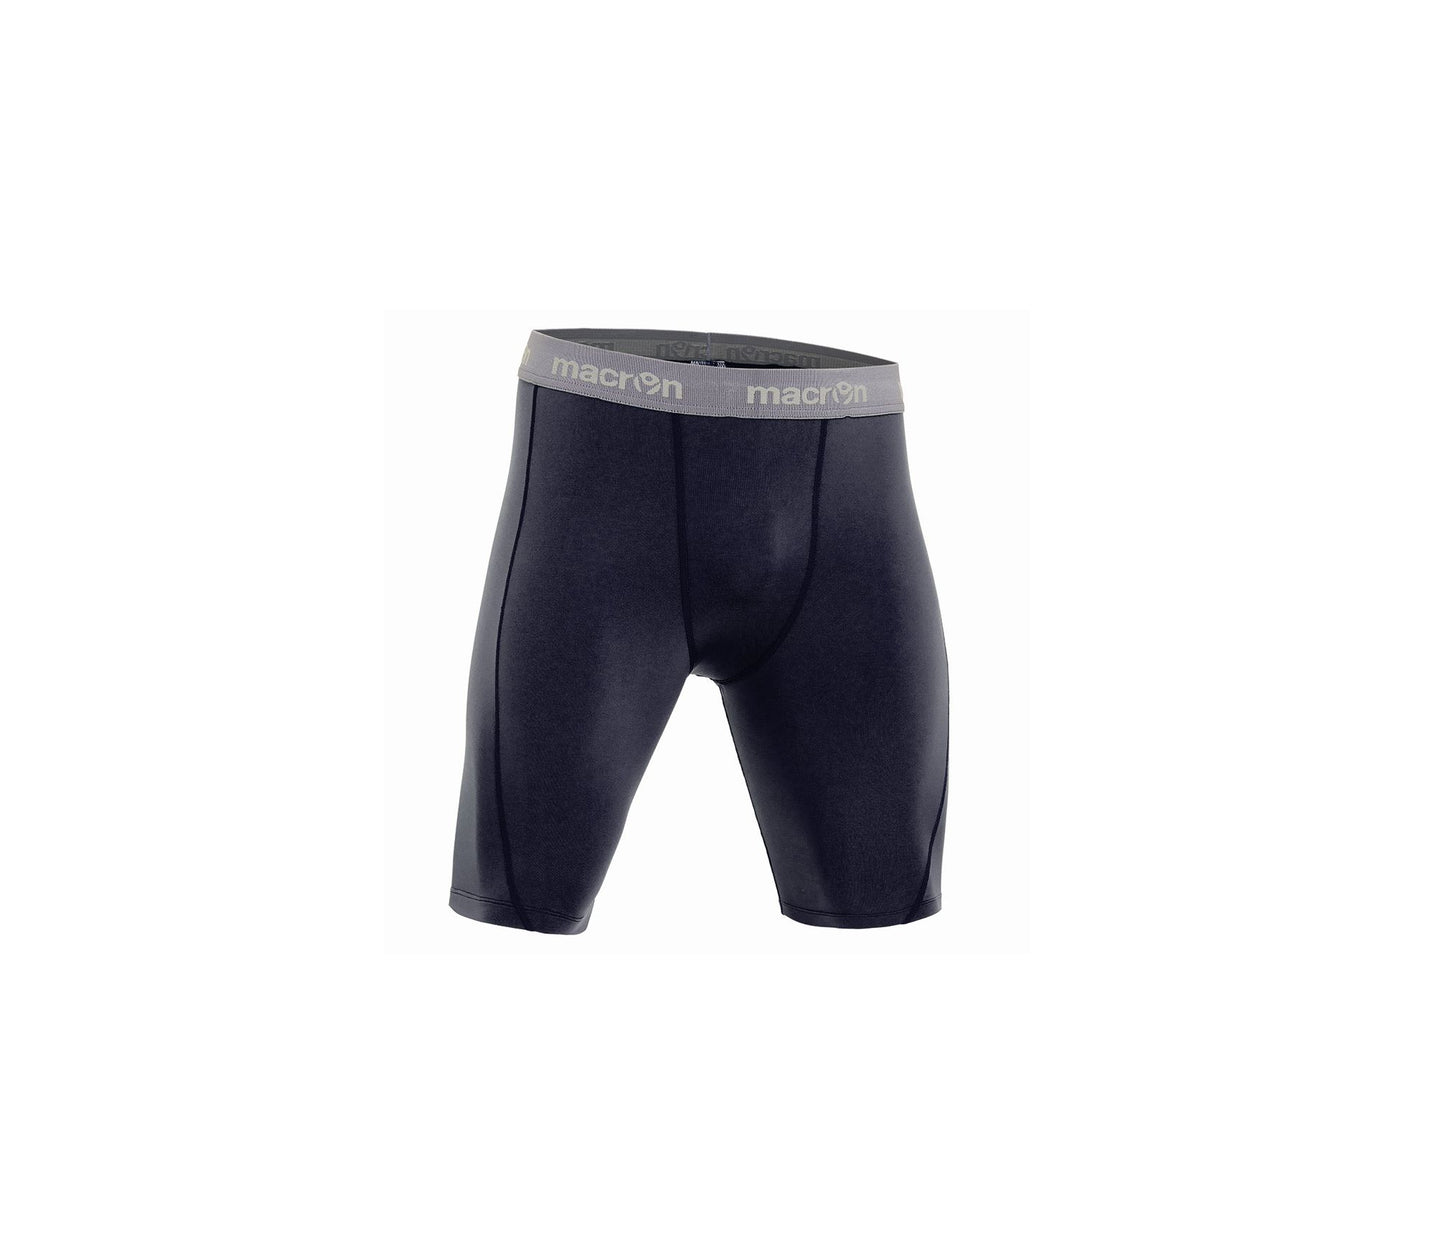 Special children's sports shorts